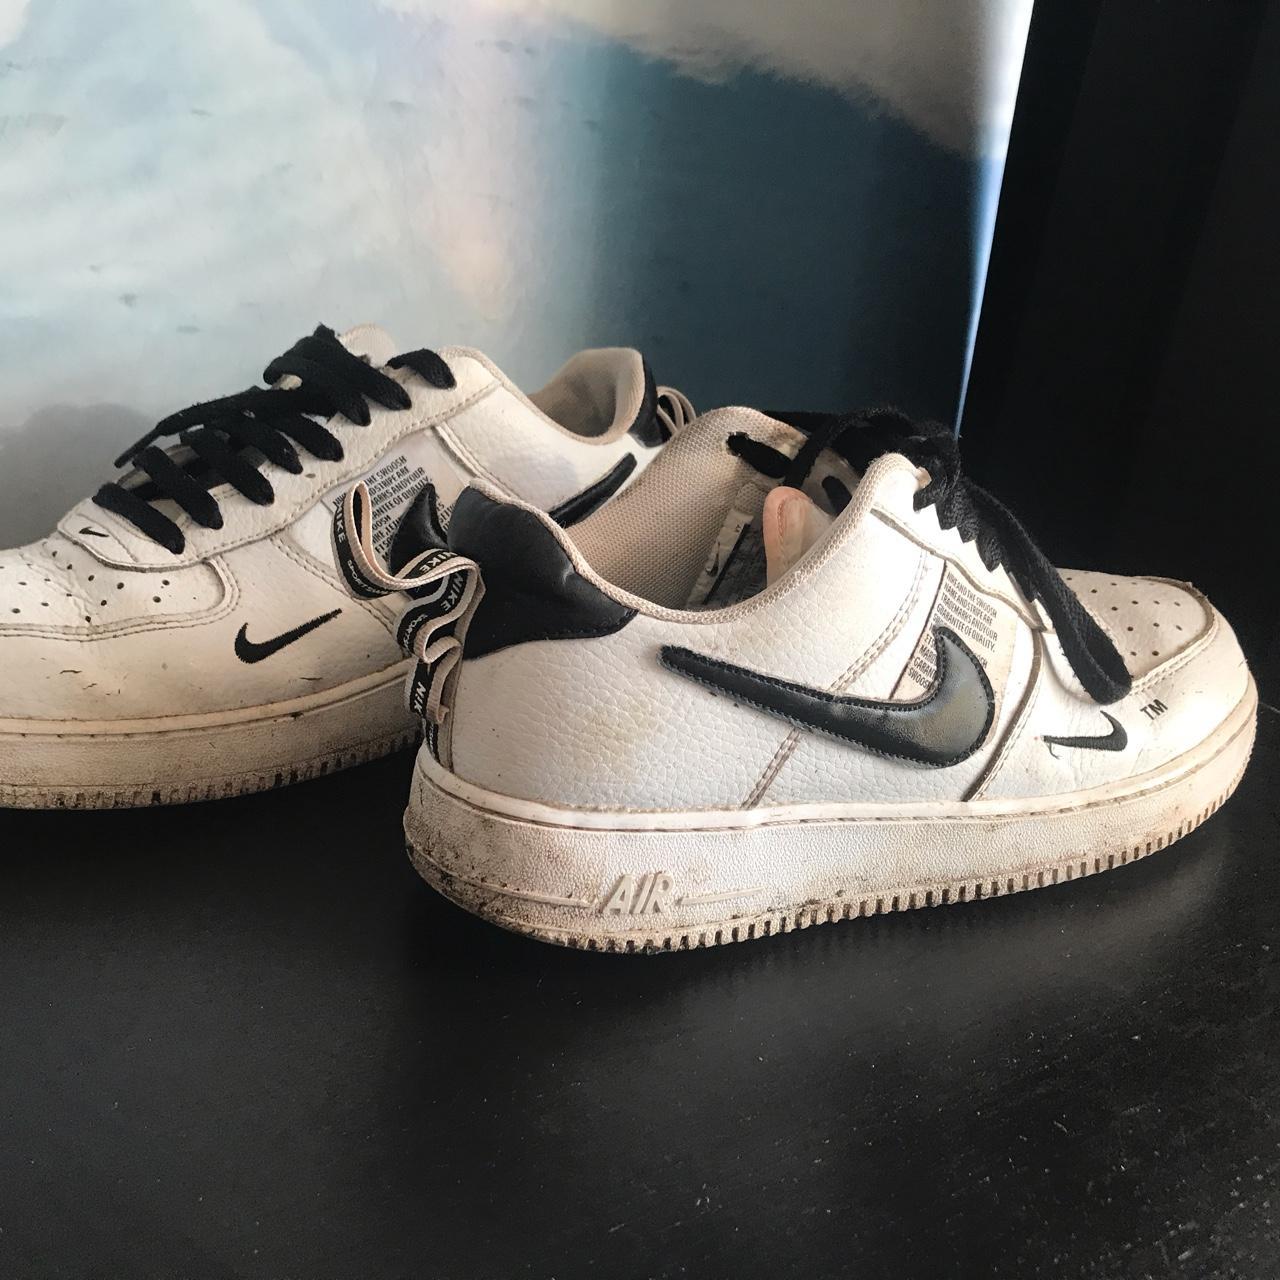 Nike airforce ones. Worn a lot so up for different... - Depop